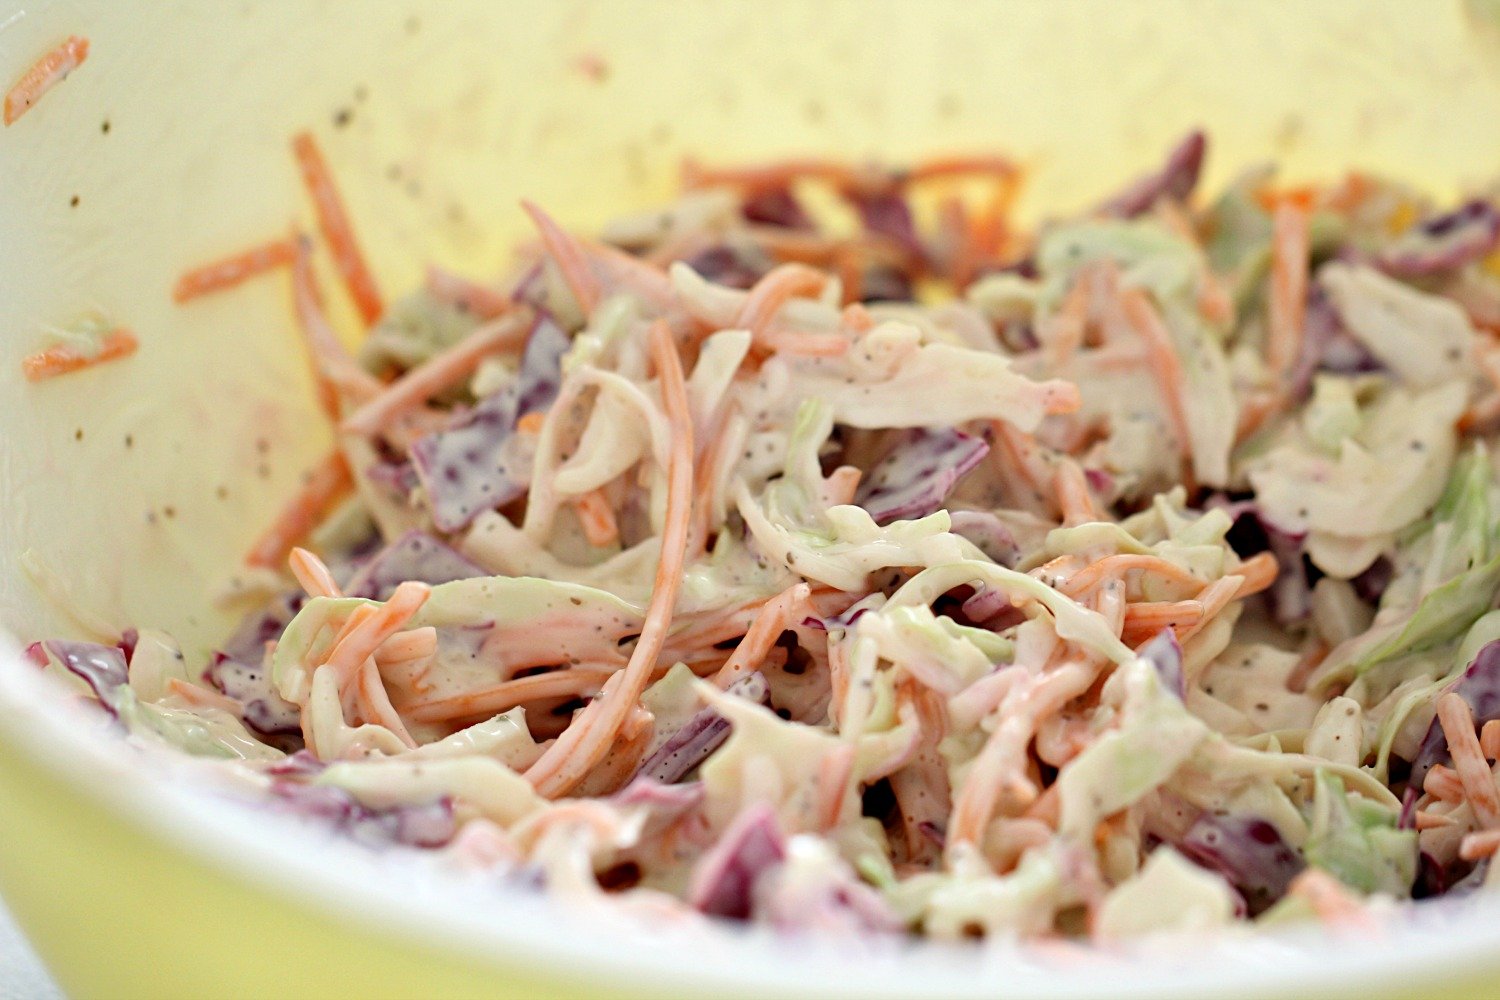 Coleslaw in a mixing bowl